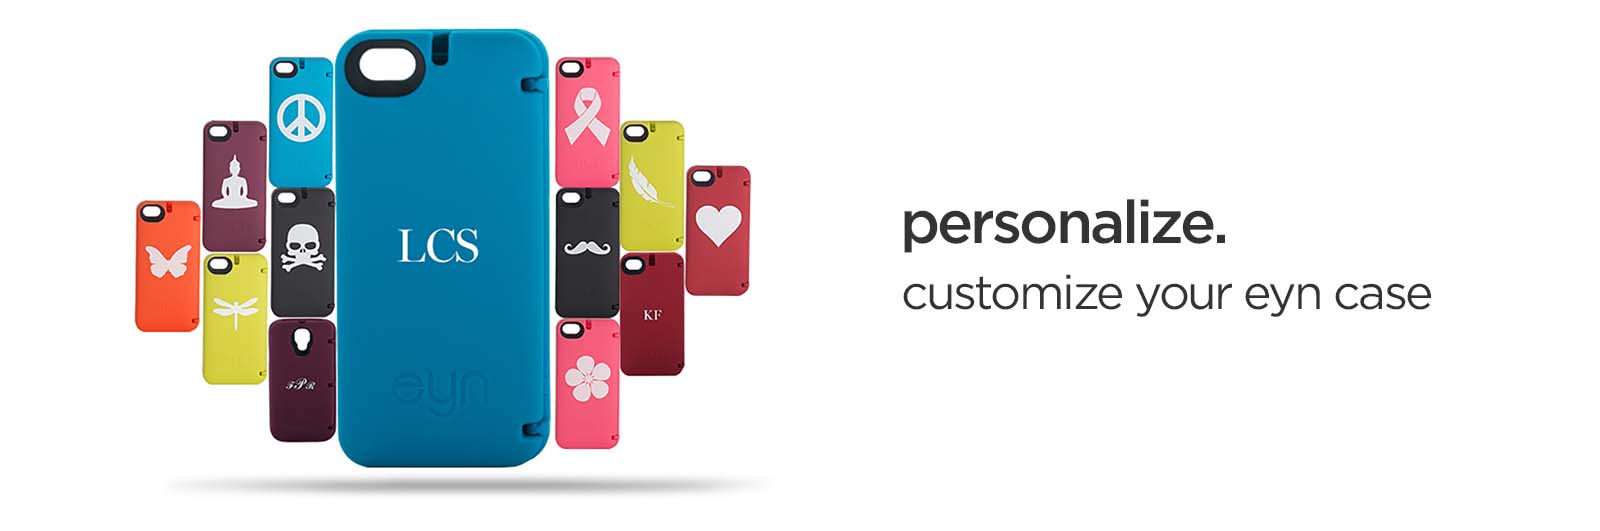 personalize. customize your EYN case